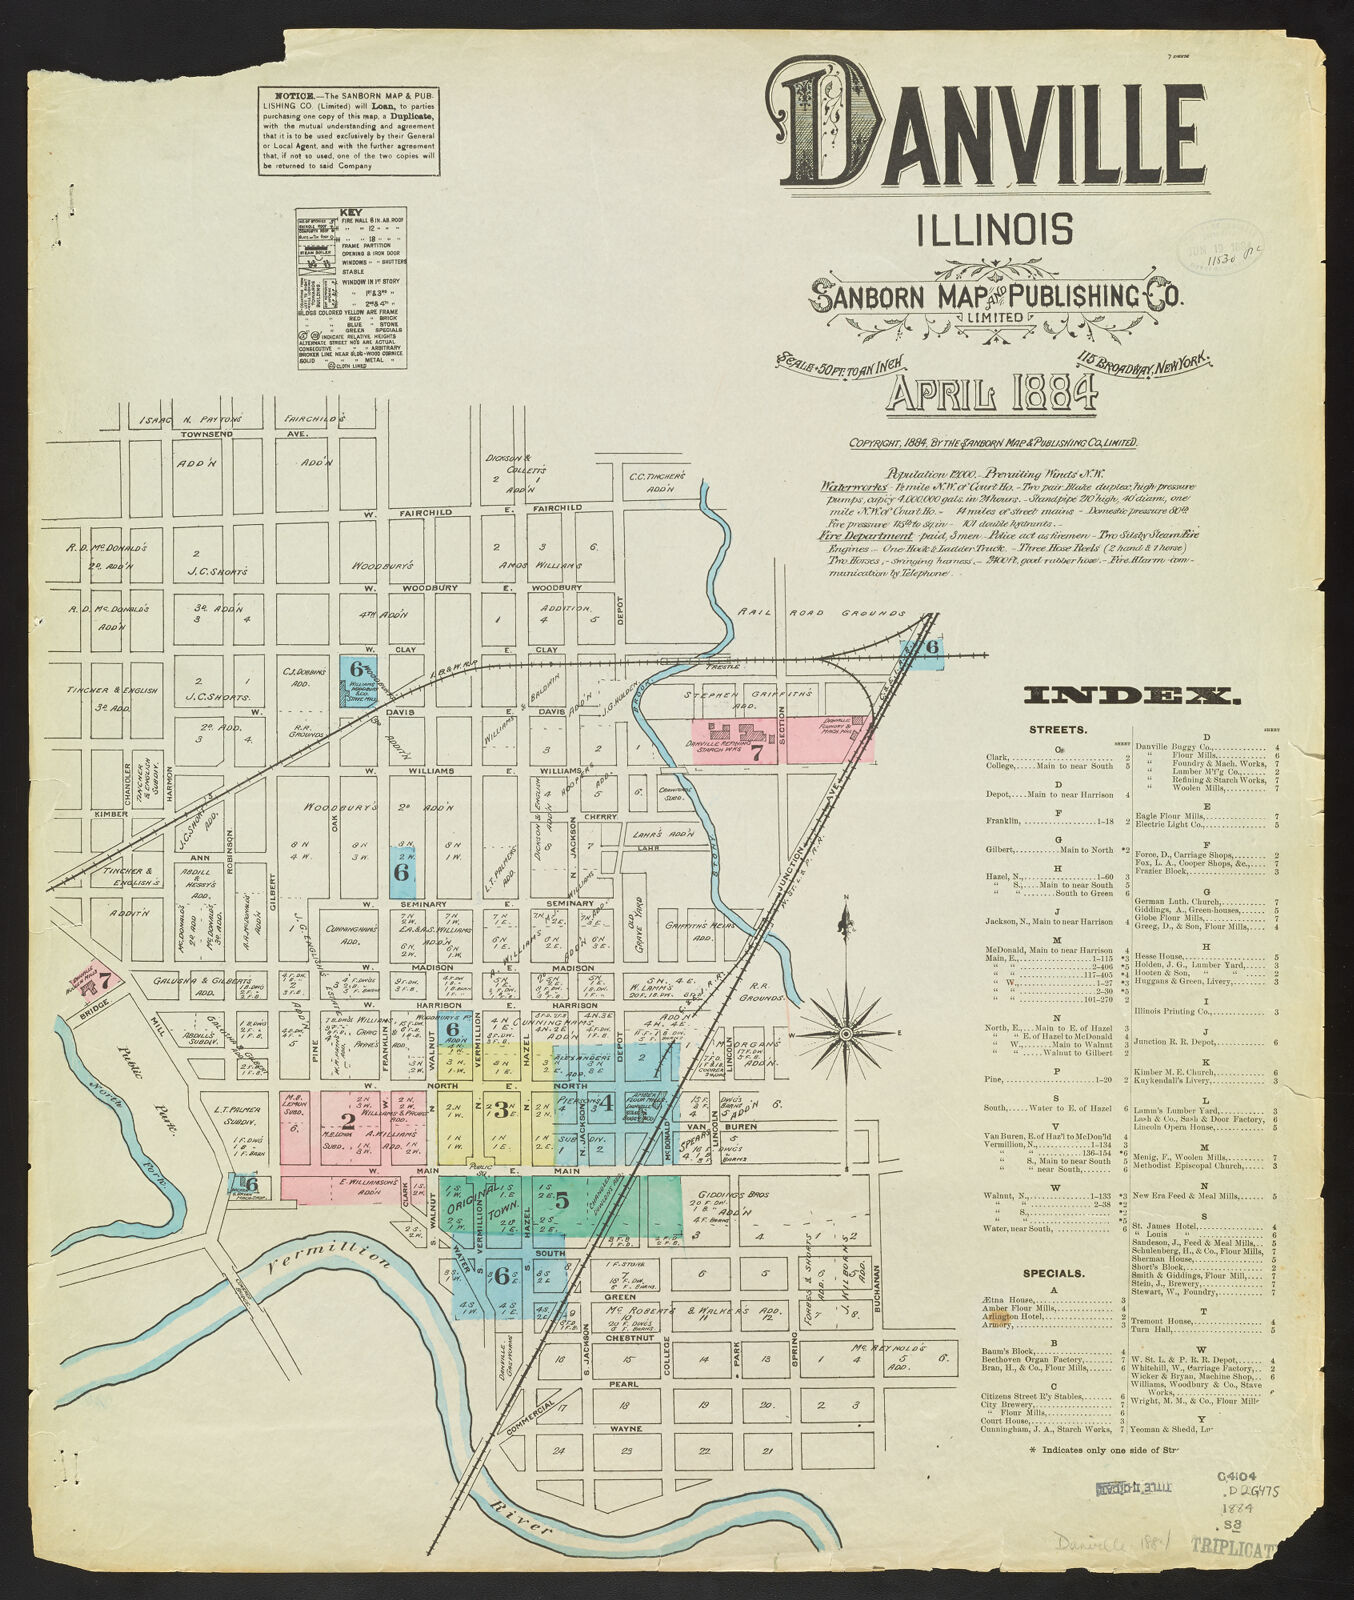 Danville Illinois April 1884 Digital Collections at the University